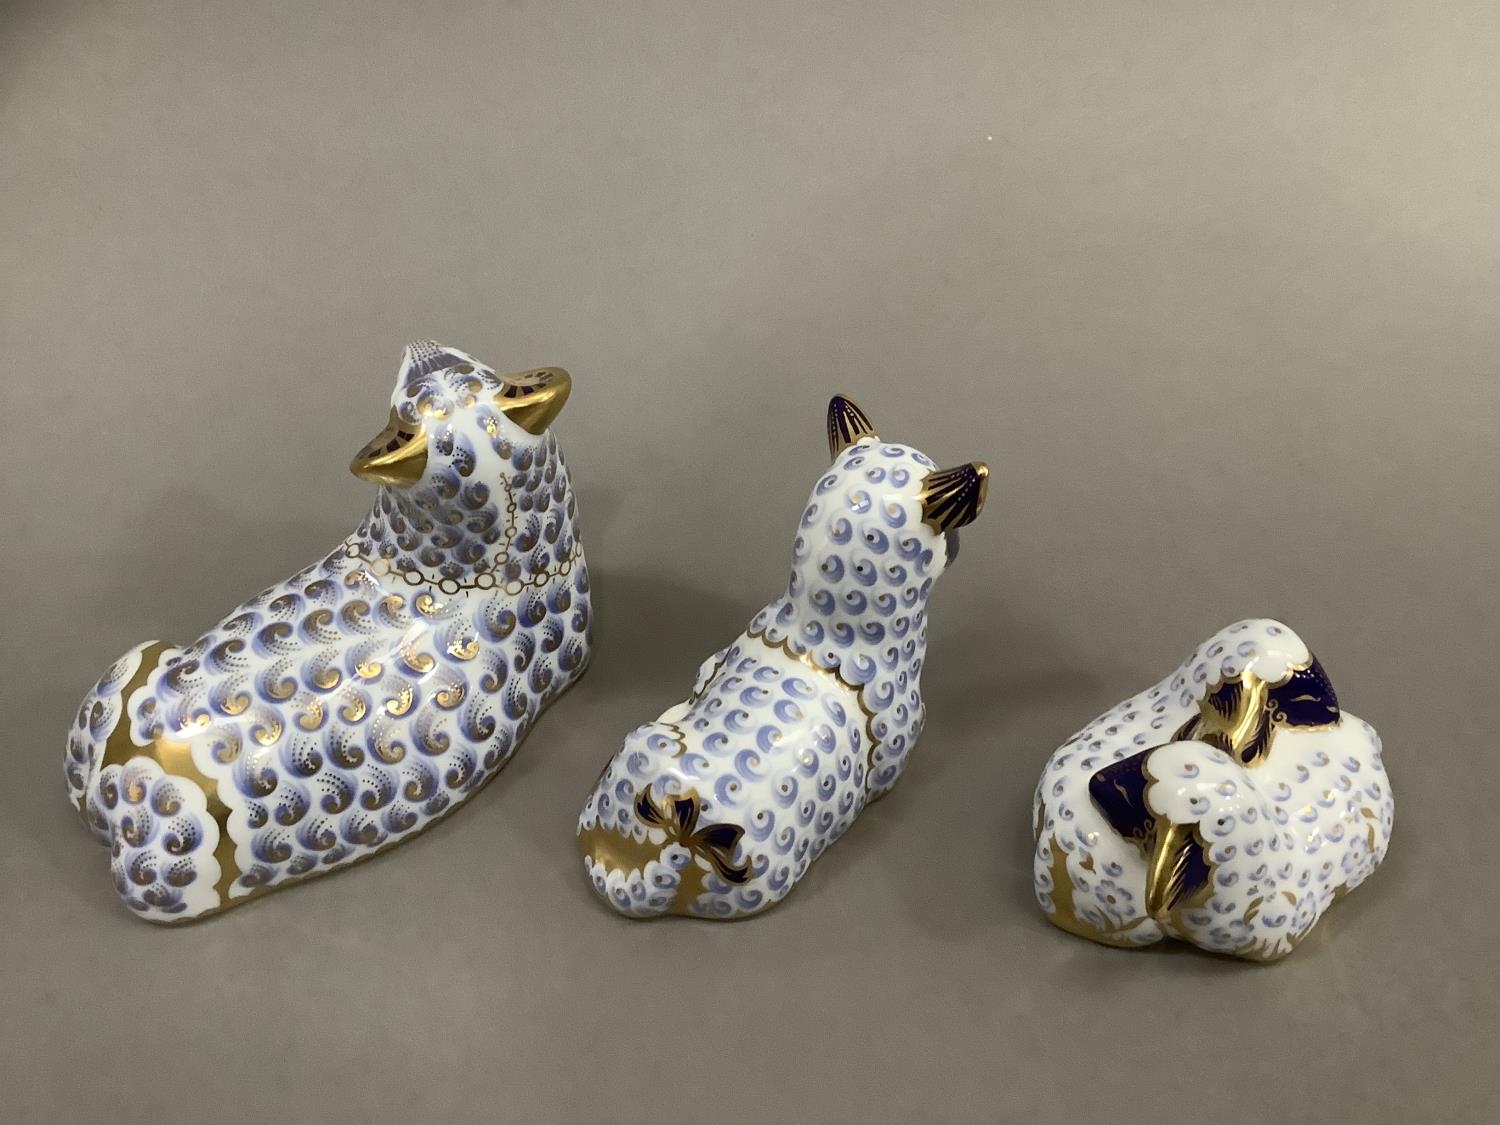 A Royal Crown Derby ram, ewe and two lambs, silver buttons (3) 7.5cm, 6.5cm and 4 cm high - Image 4 of 5